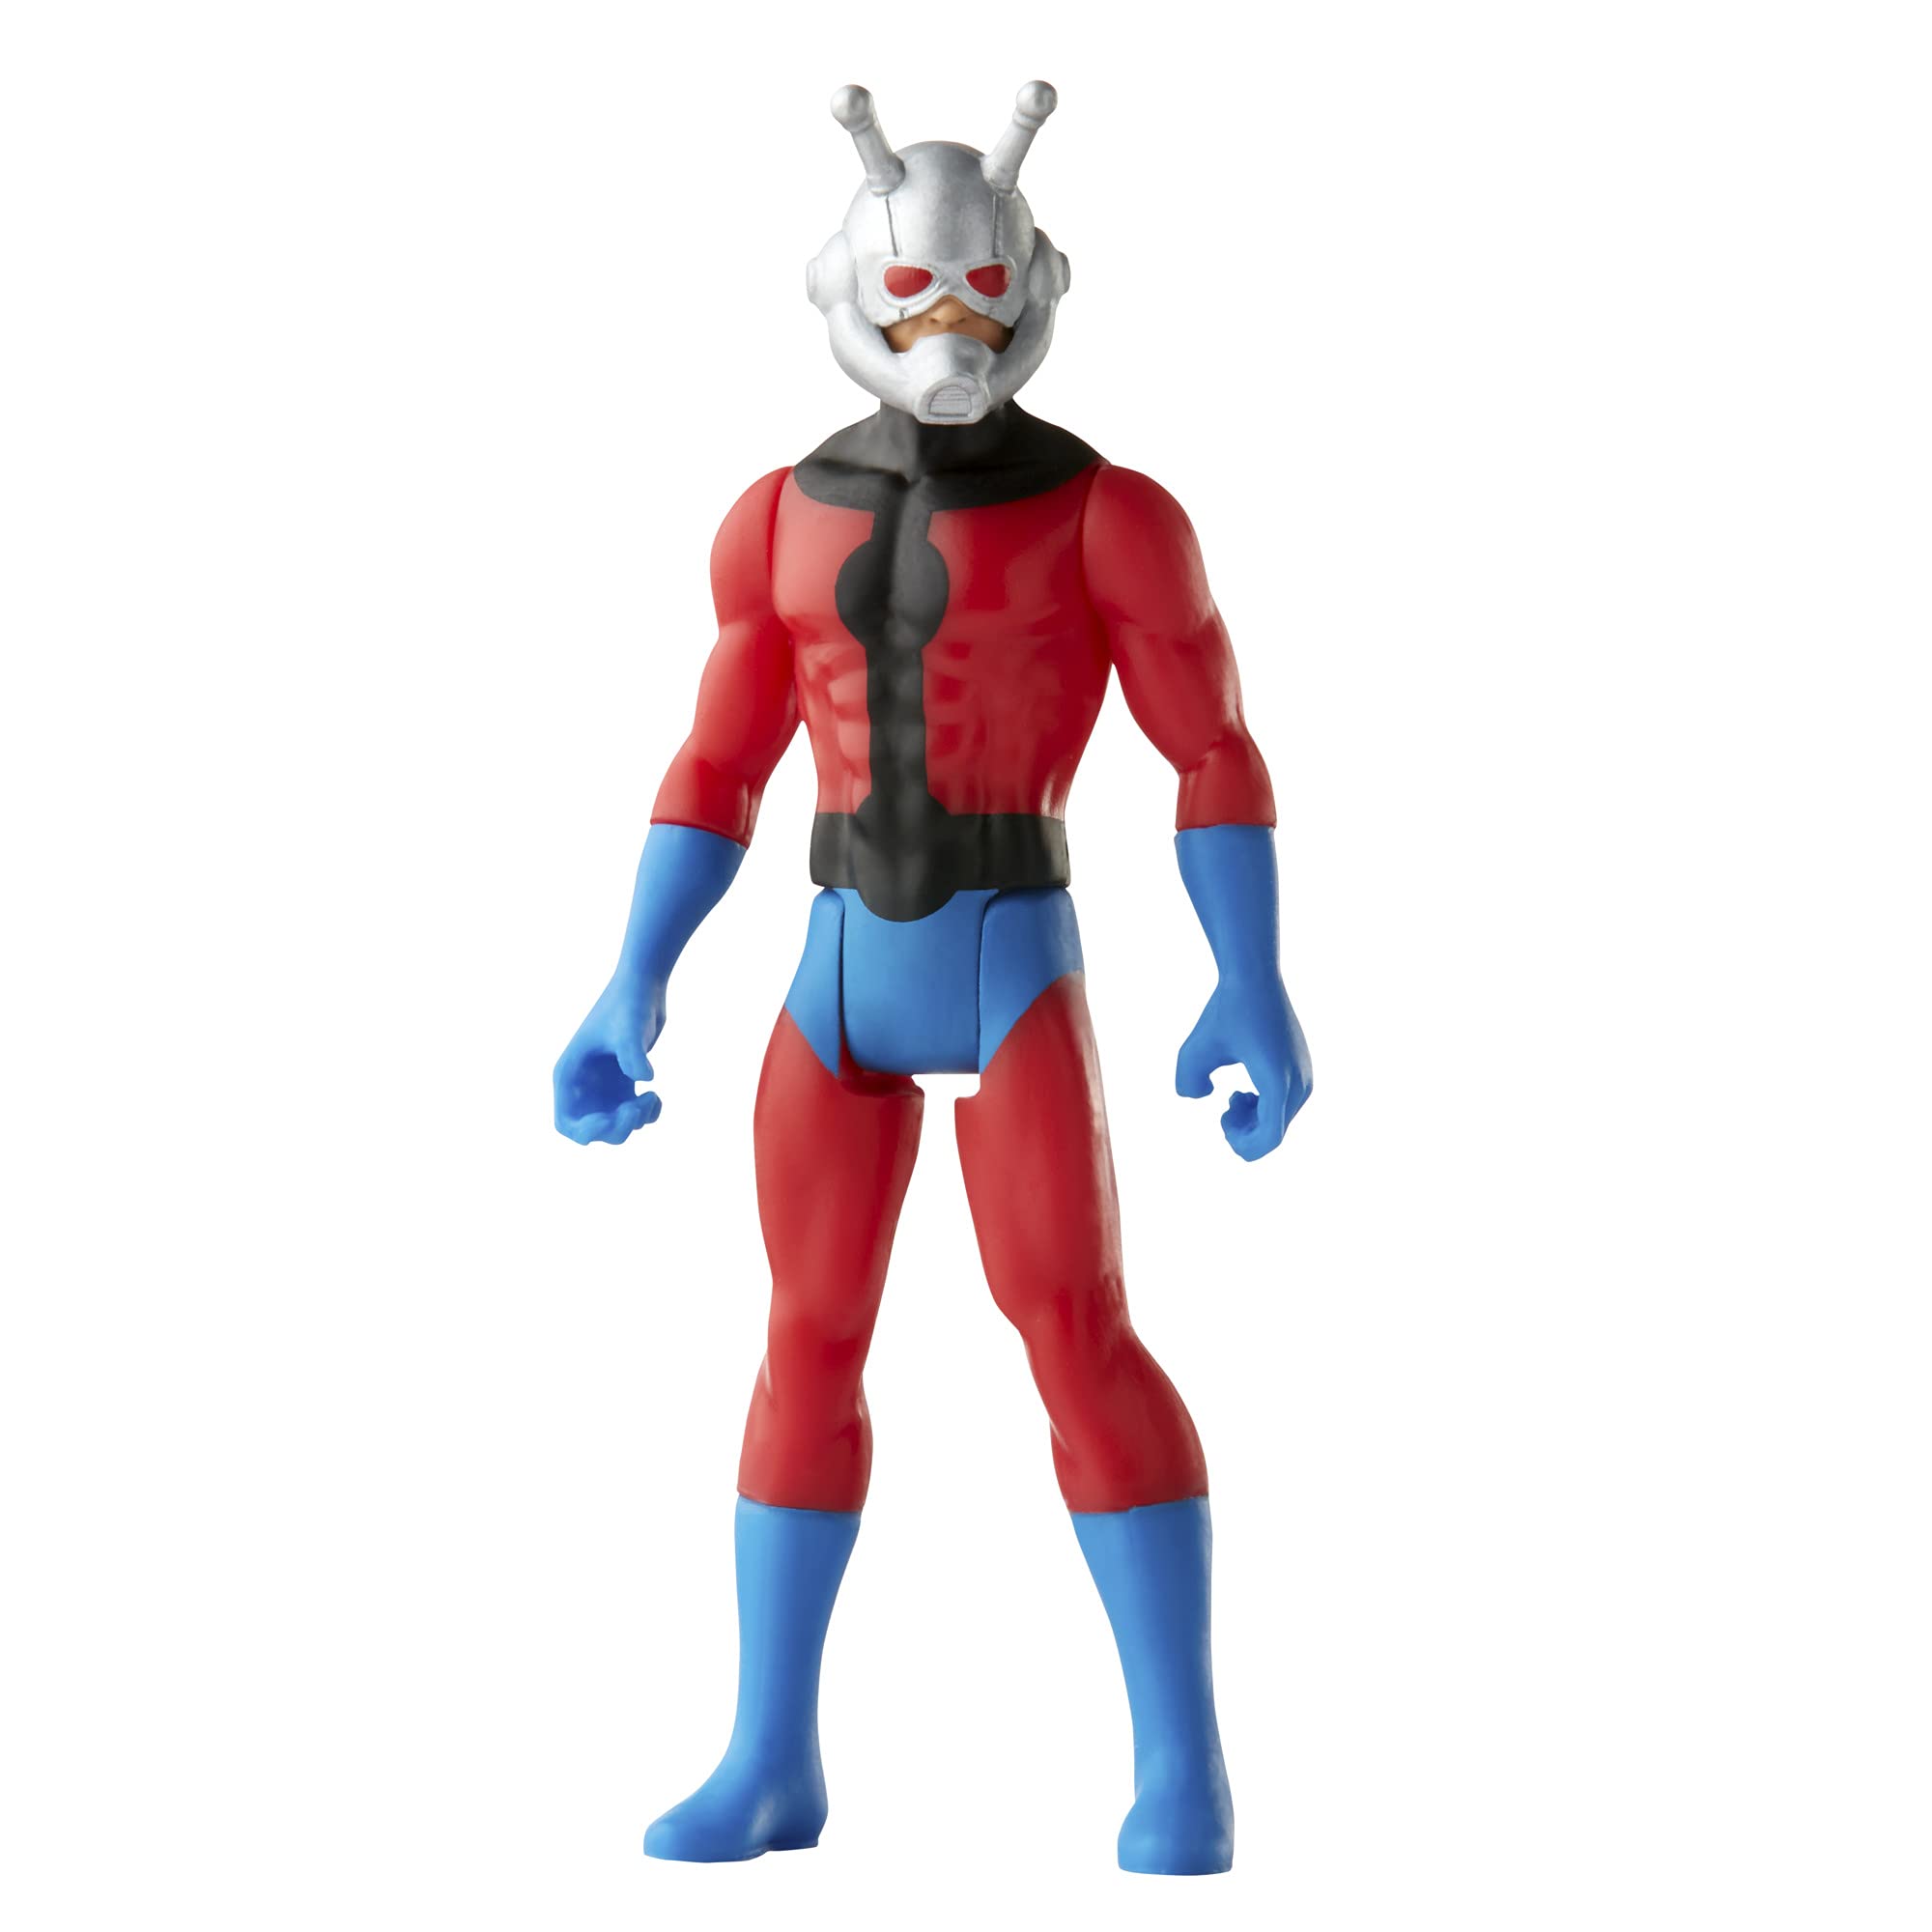 Marvel Hasbro Legends 3.75-inch Retro 375 Collection Ant-Man Action Figure Toy, Red